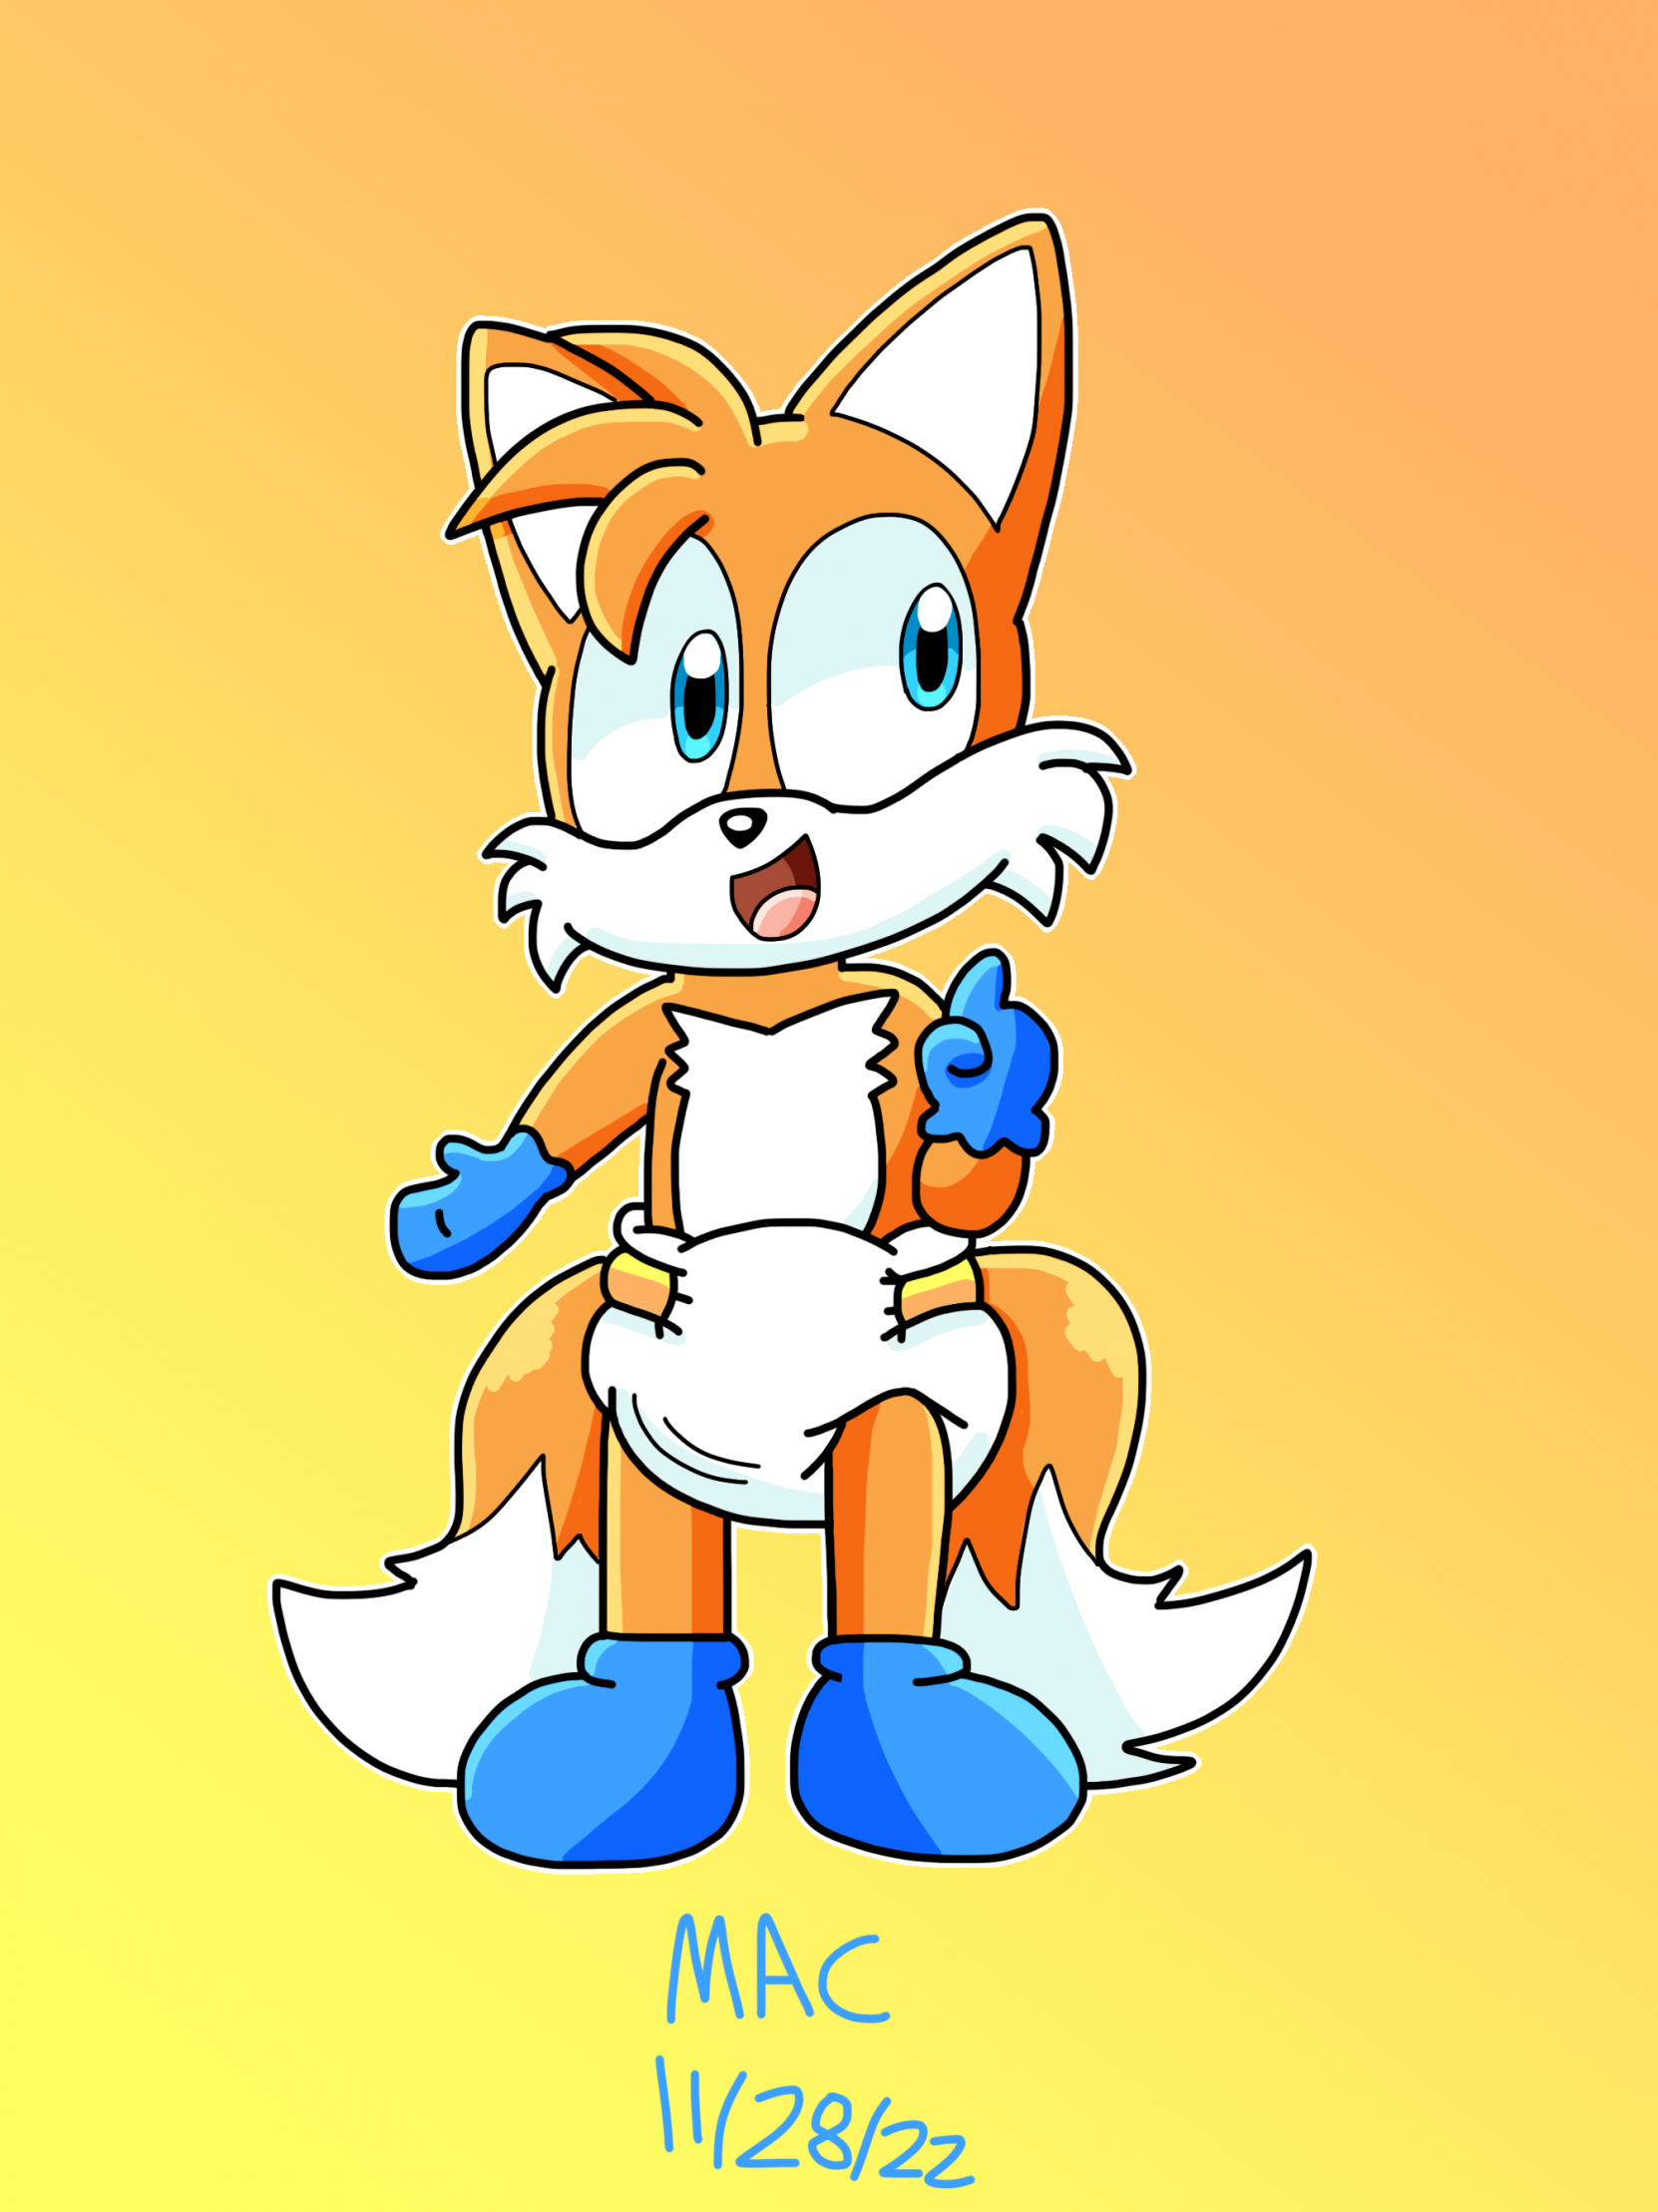 Baby Sonic and Baby Tails by GEPredators -- Fur Affinity [dot] net